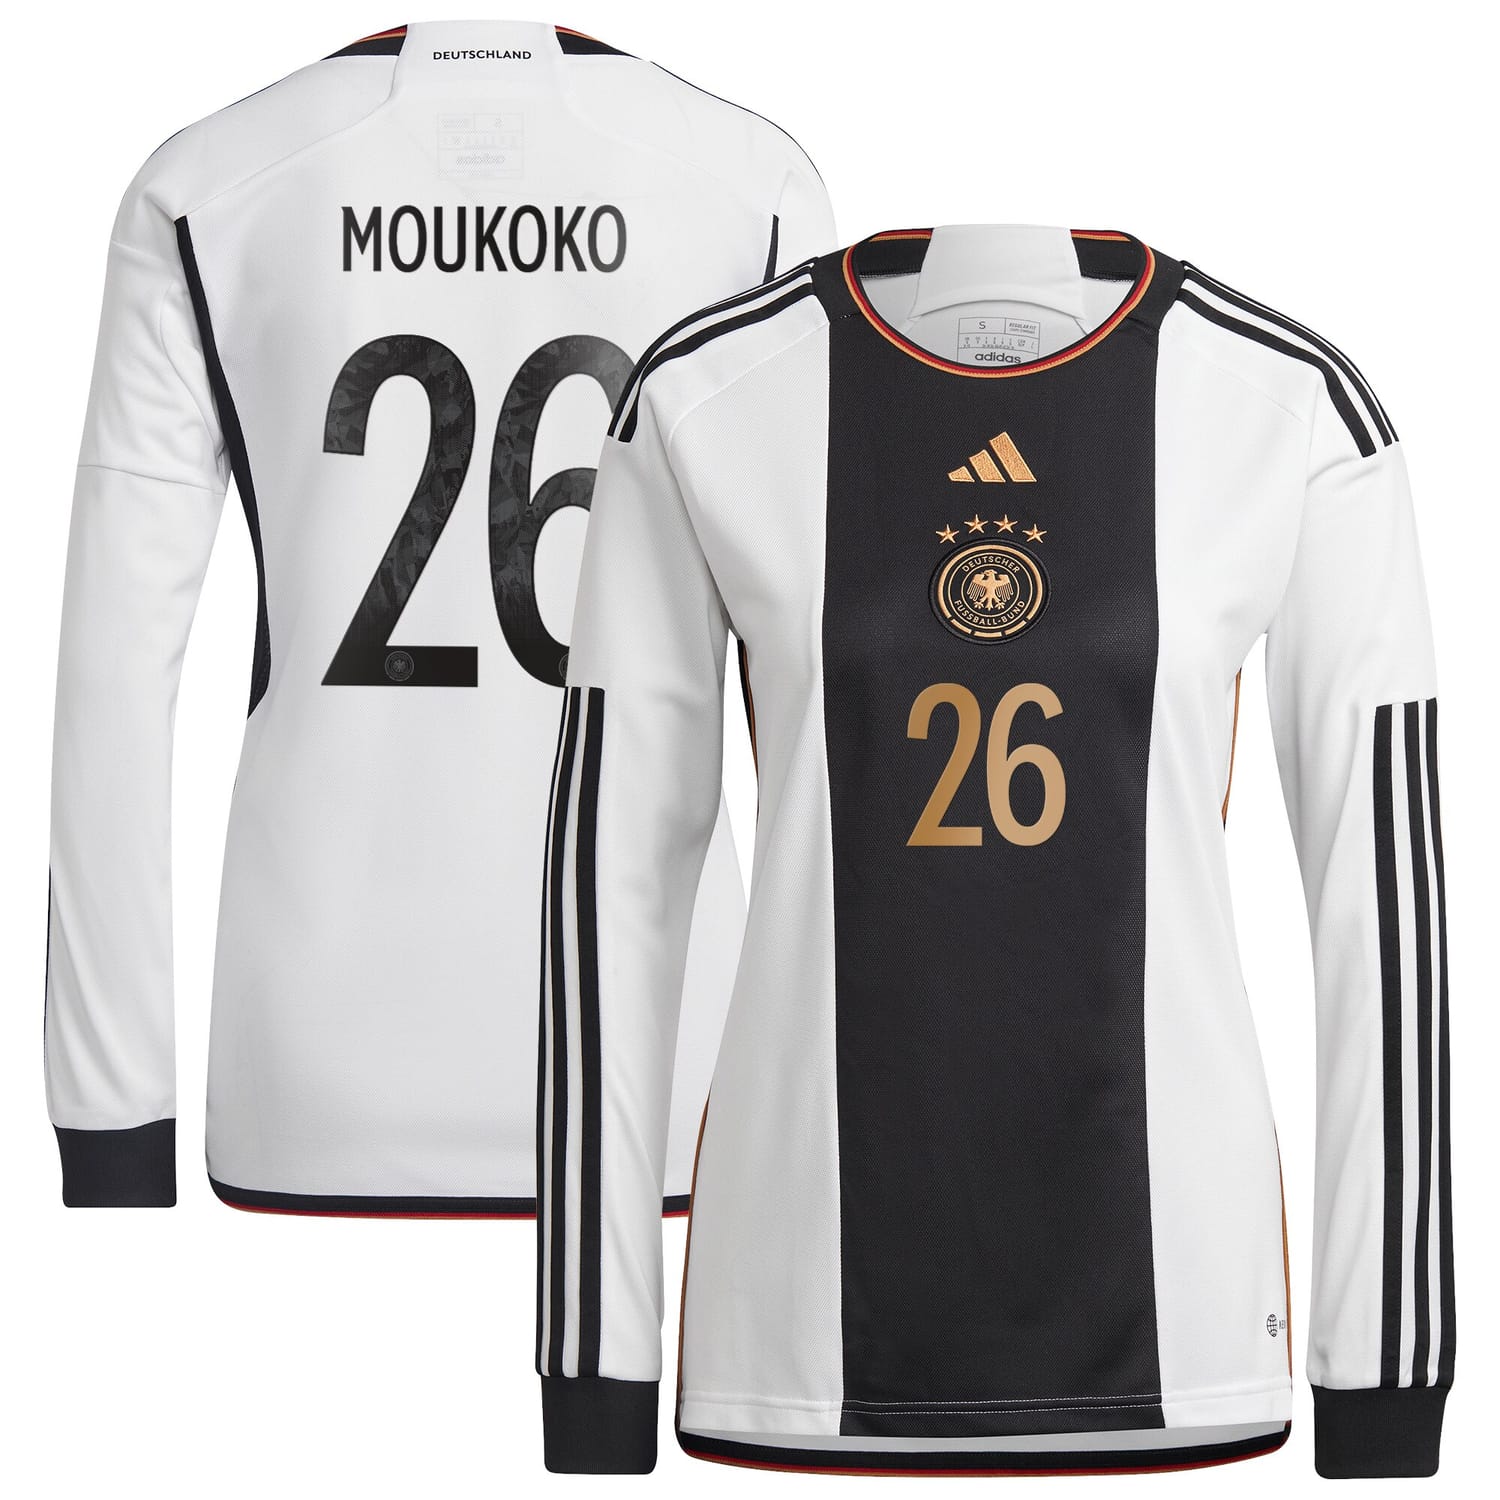 Germany National Team Home Jersey Shirt Long Sleeve 2022 player Youssoufa Moukoko 26 printing for Women